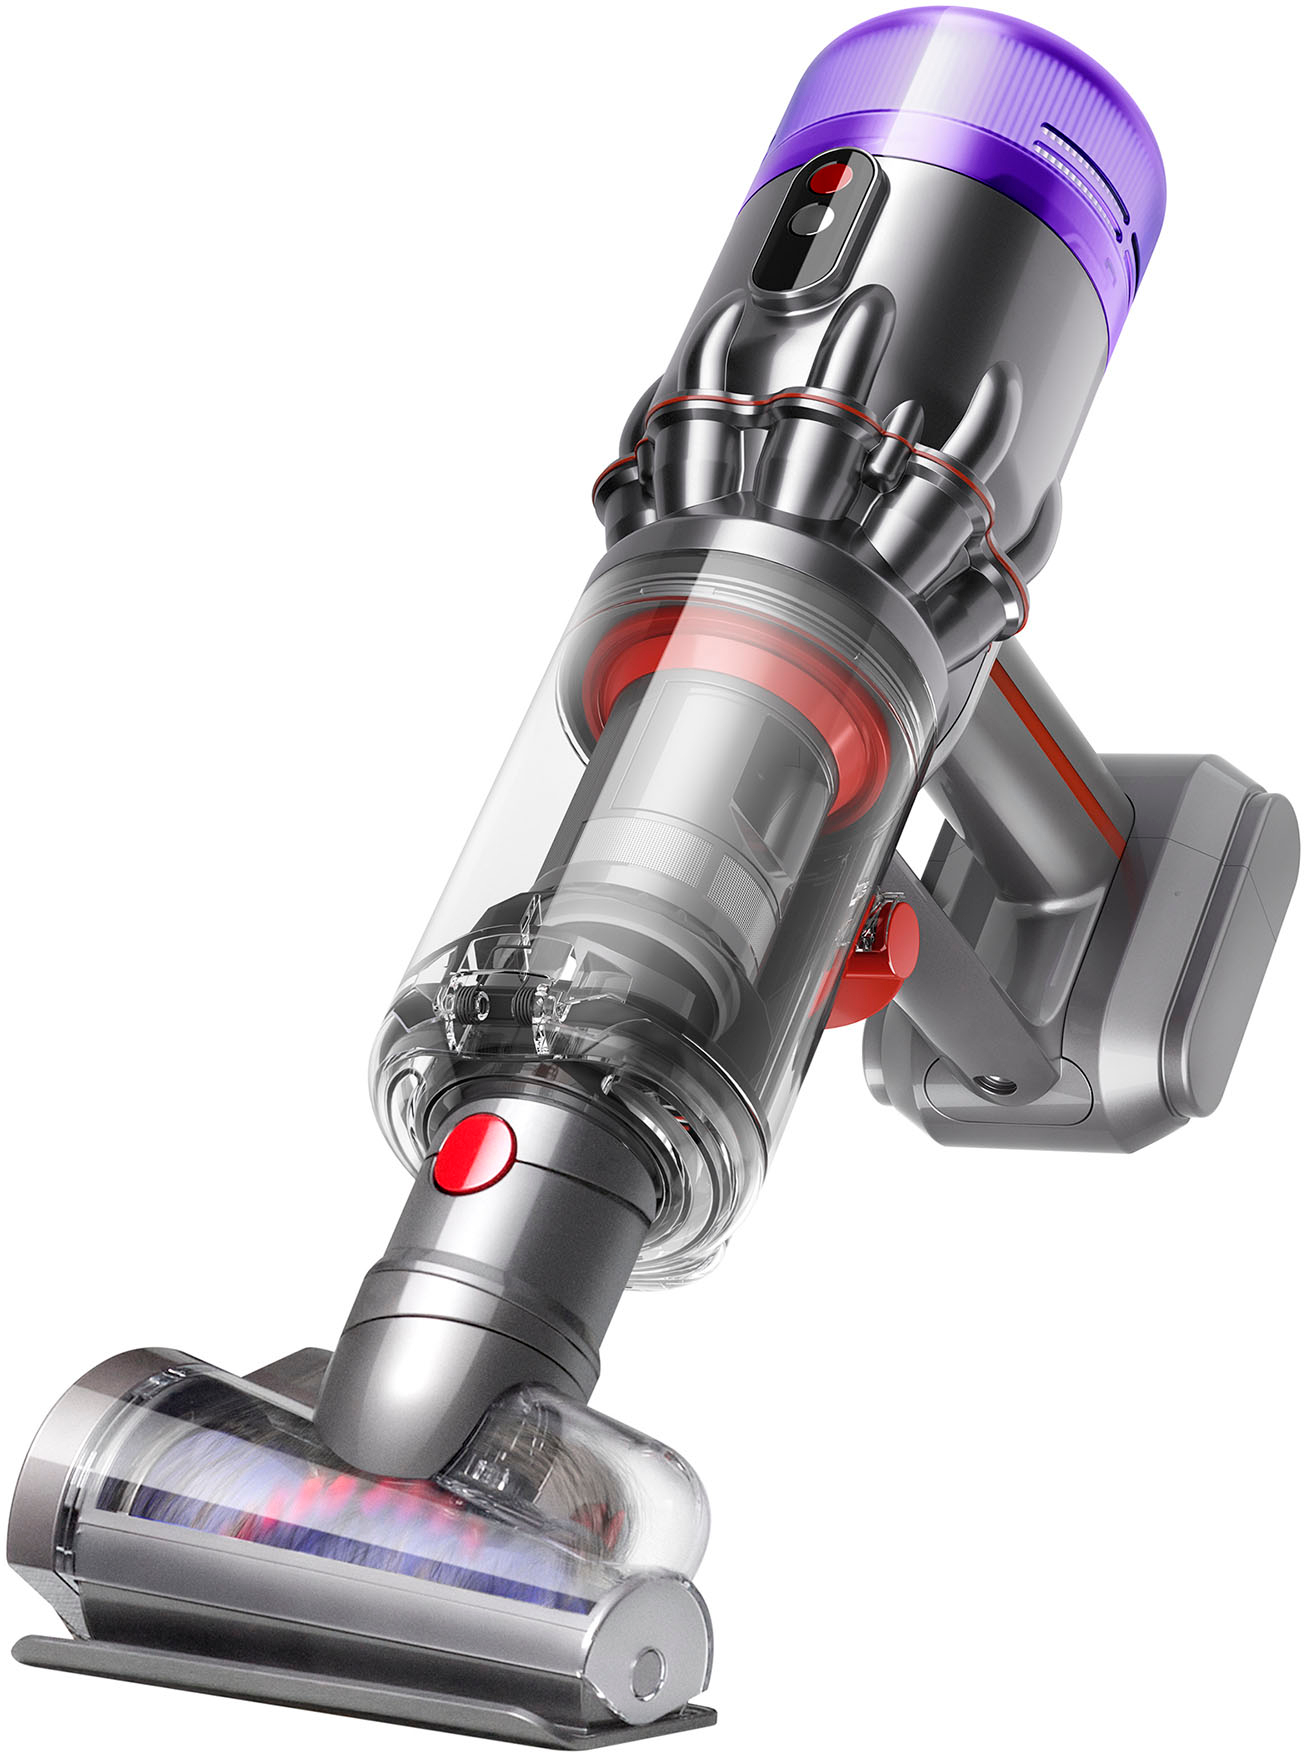 How to replace Dyson V8 battery? [4 Easy Steps]